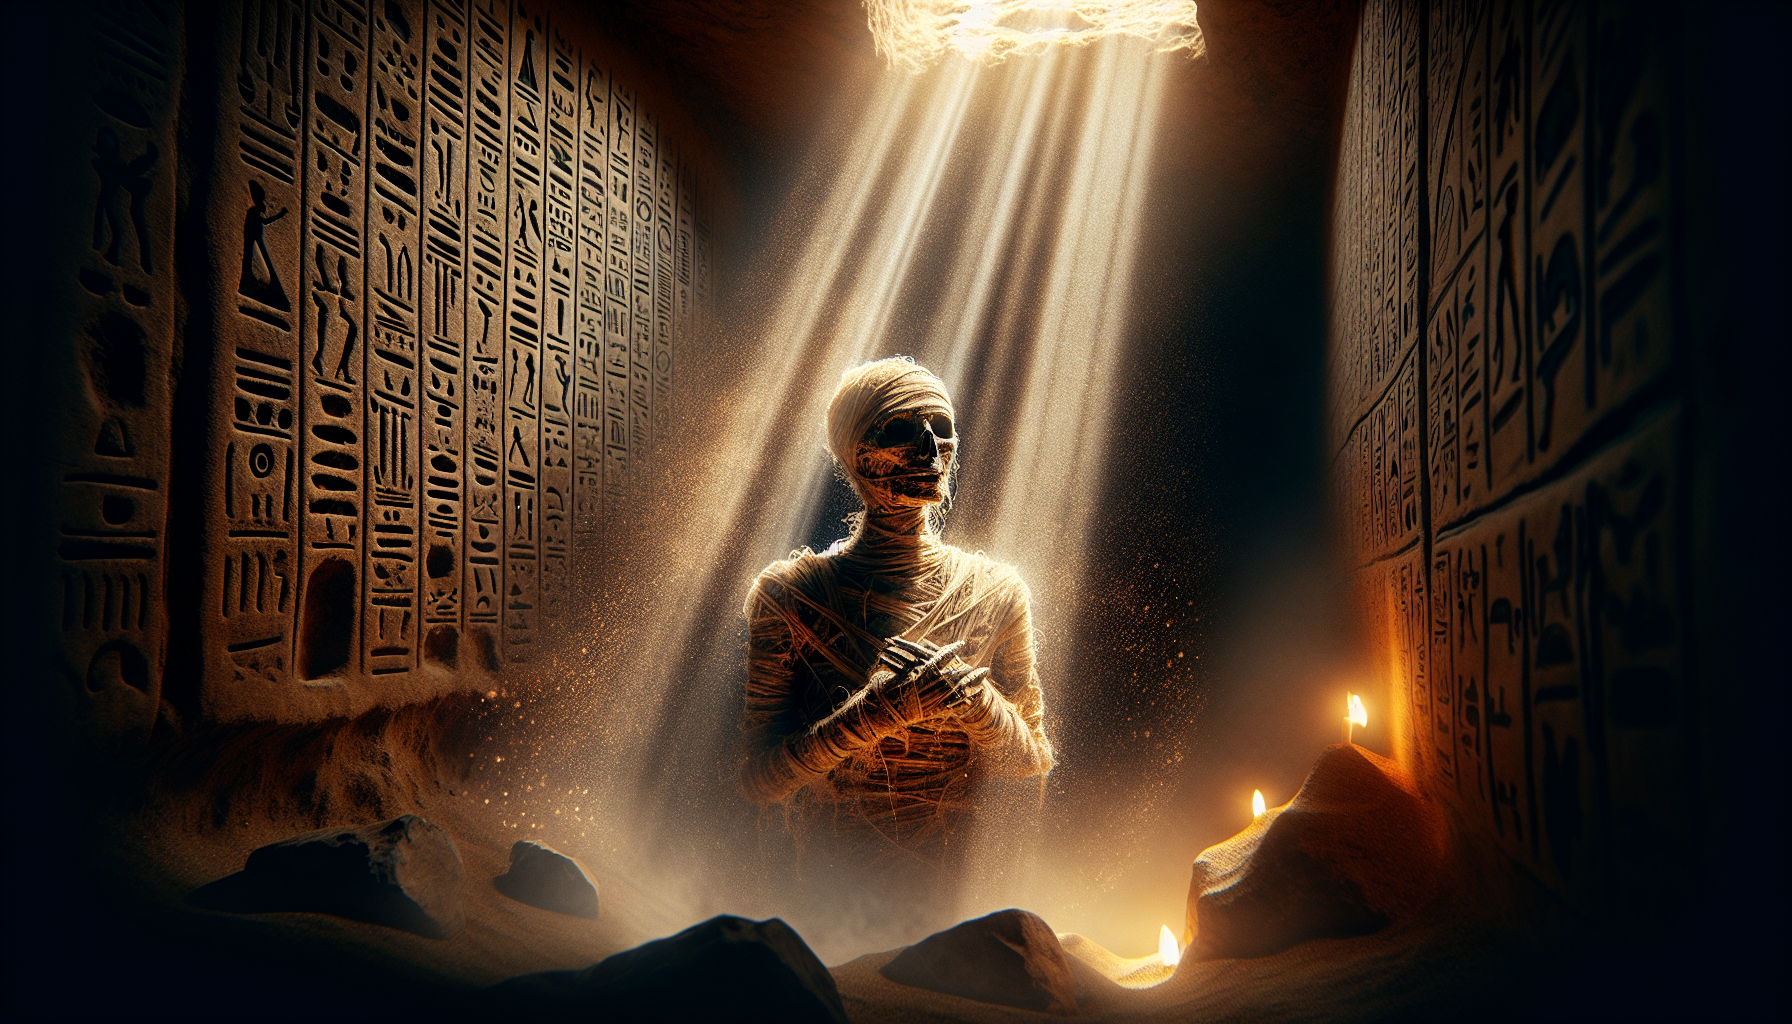 explore the fascinating question of whether mummies hold the key to immortality in this thought-provoking article. uncover the mysteries of ancient burial practices and their potential significance for the modern world.